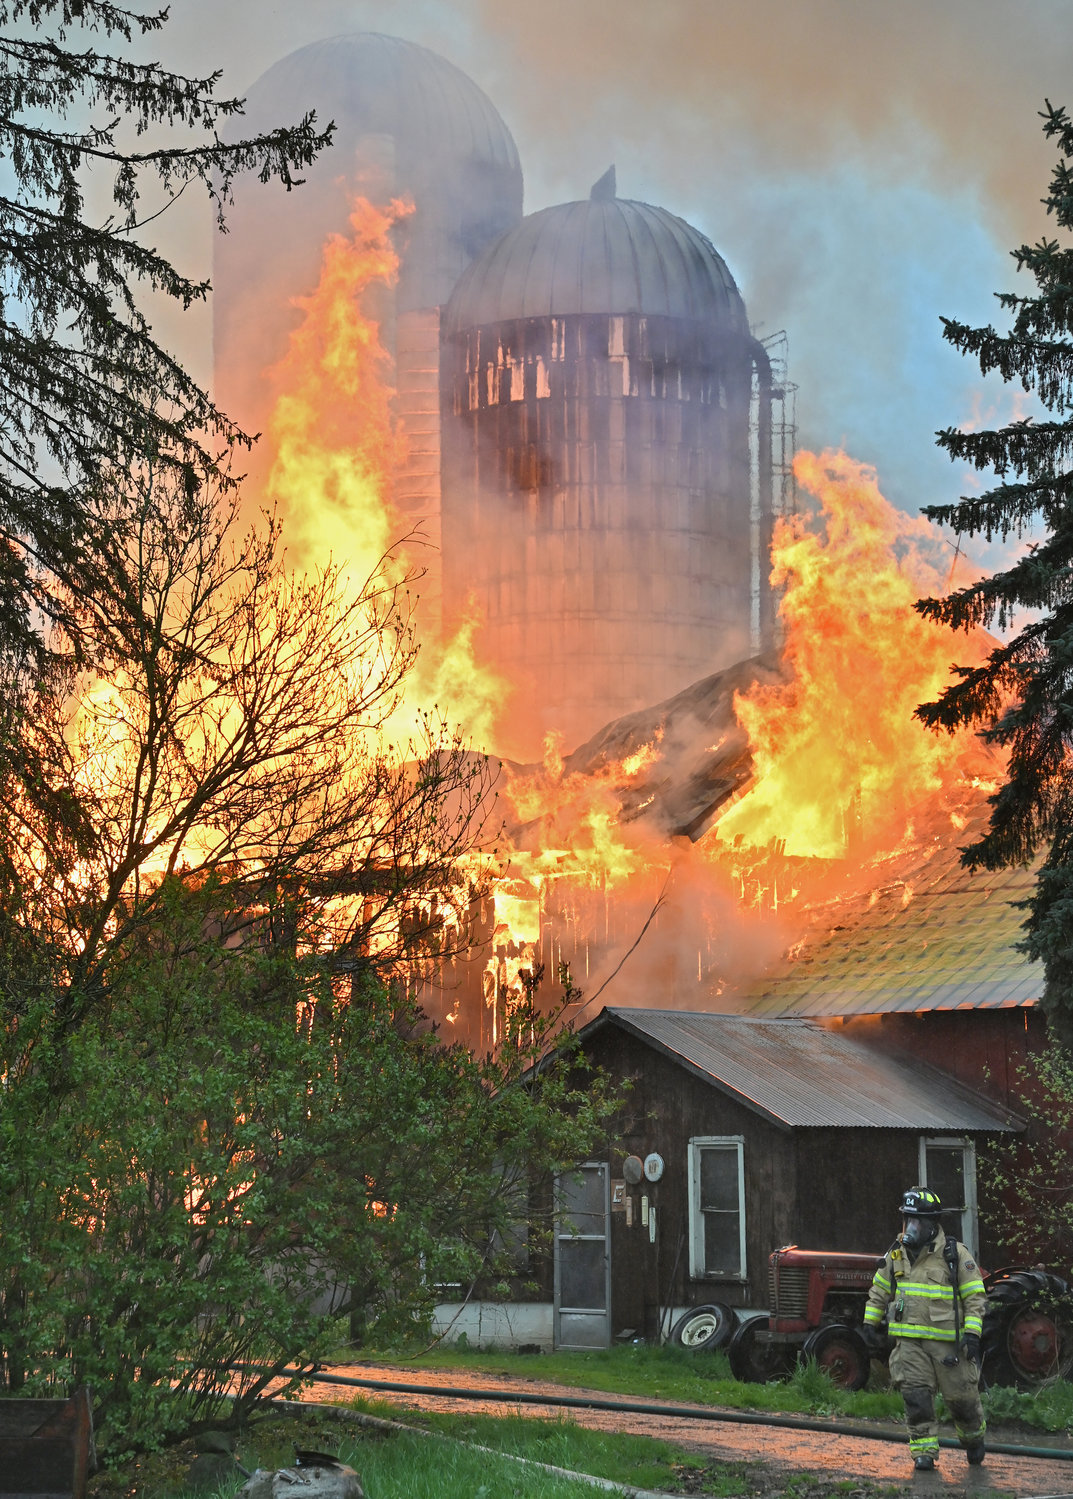 Conflagration consumes Lee Center barns | Daily Sentinel